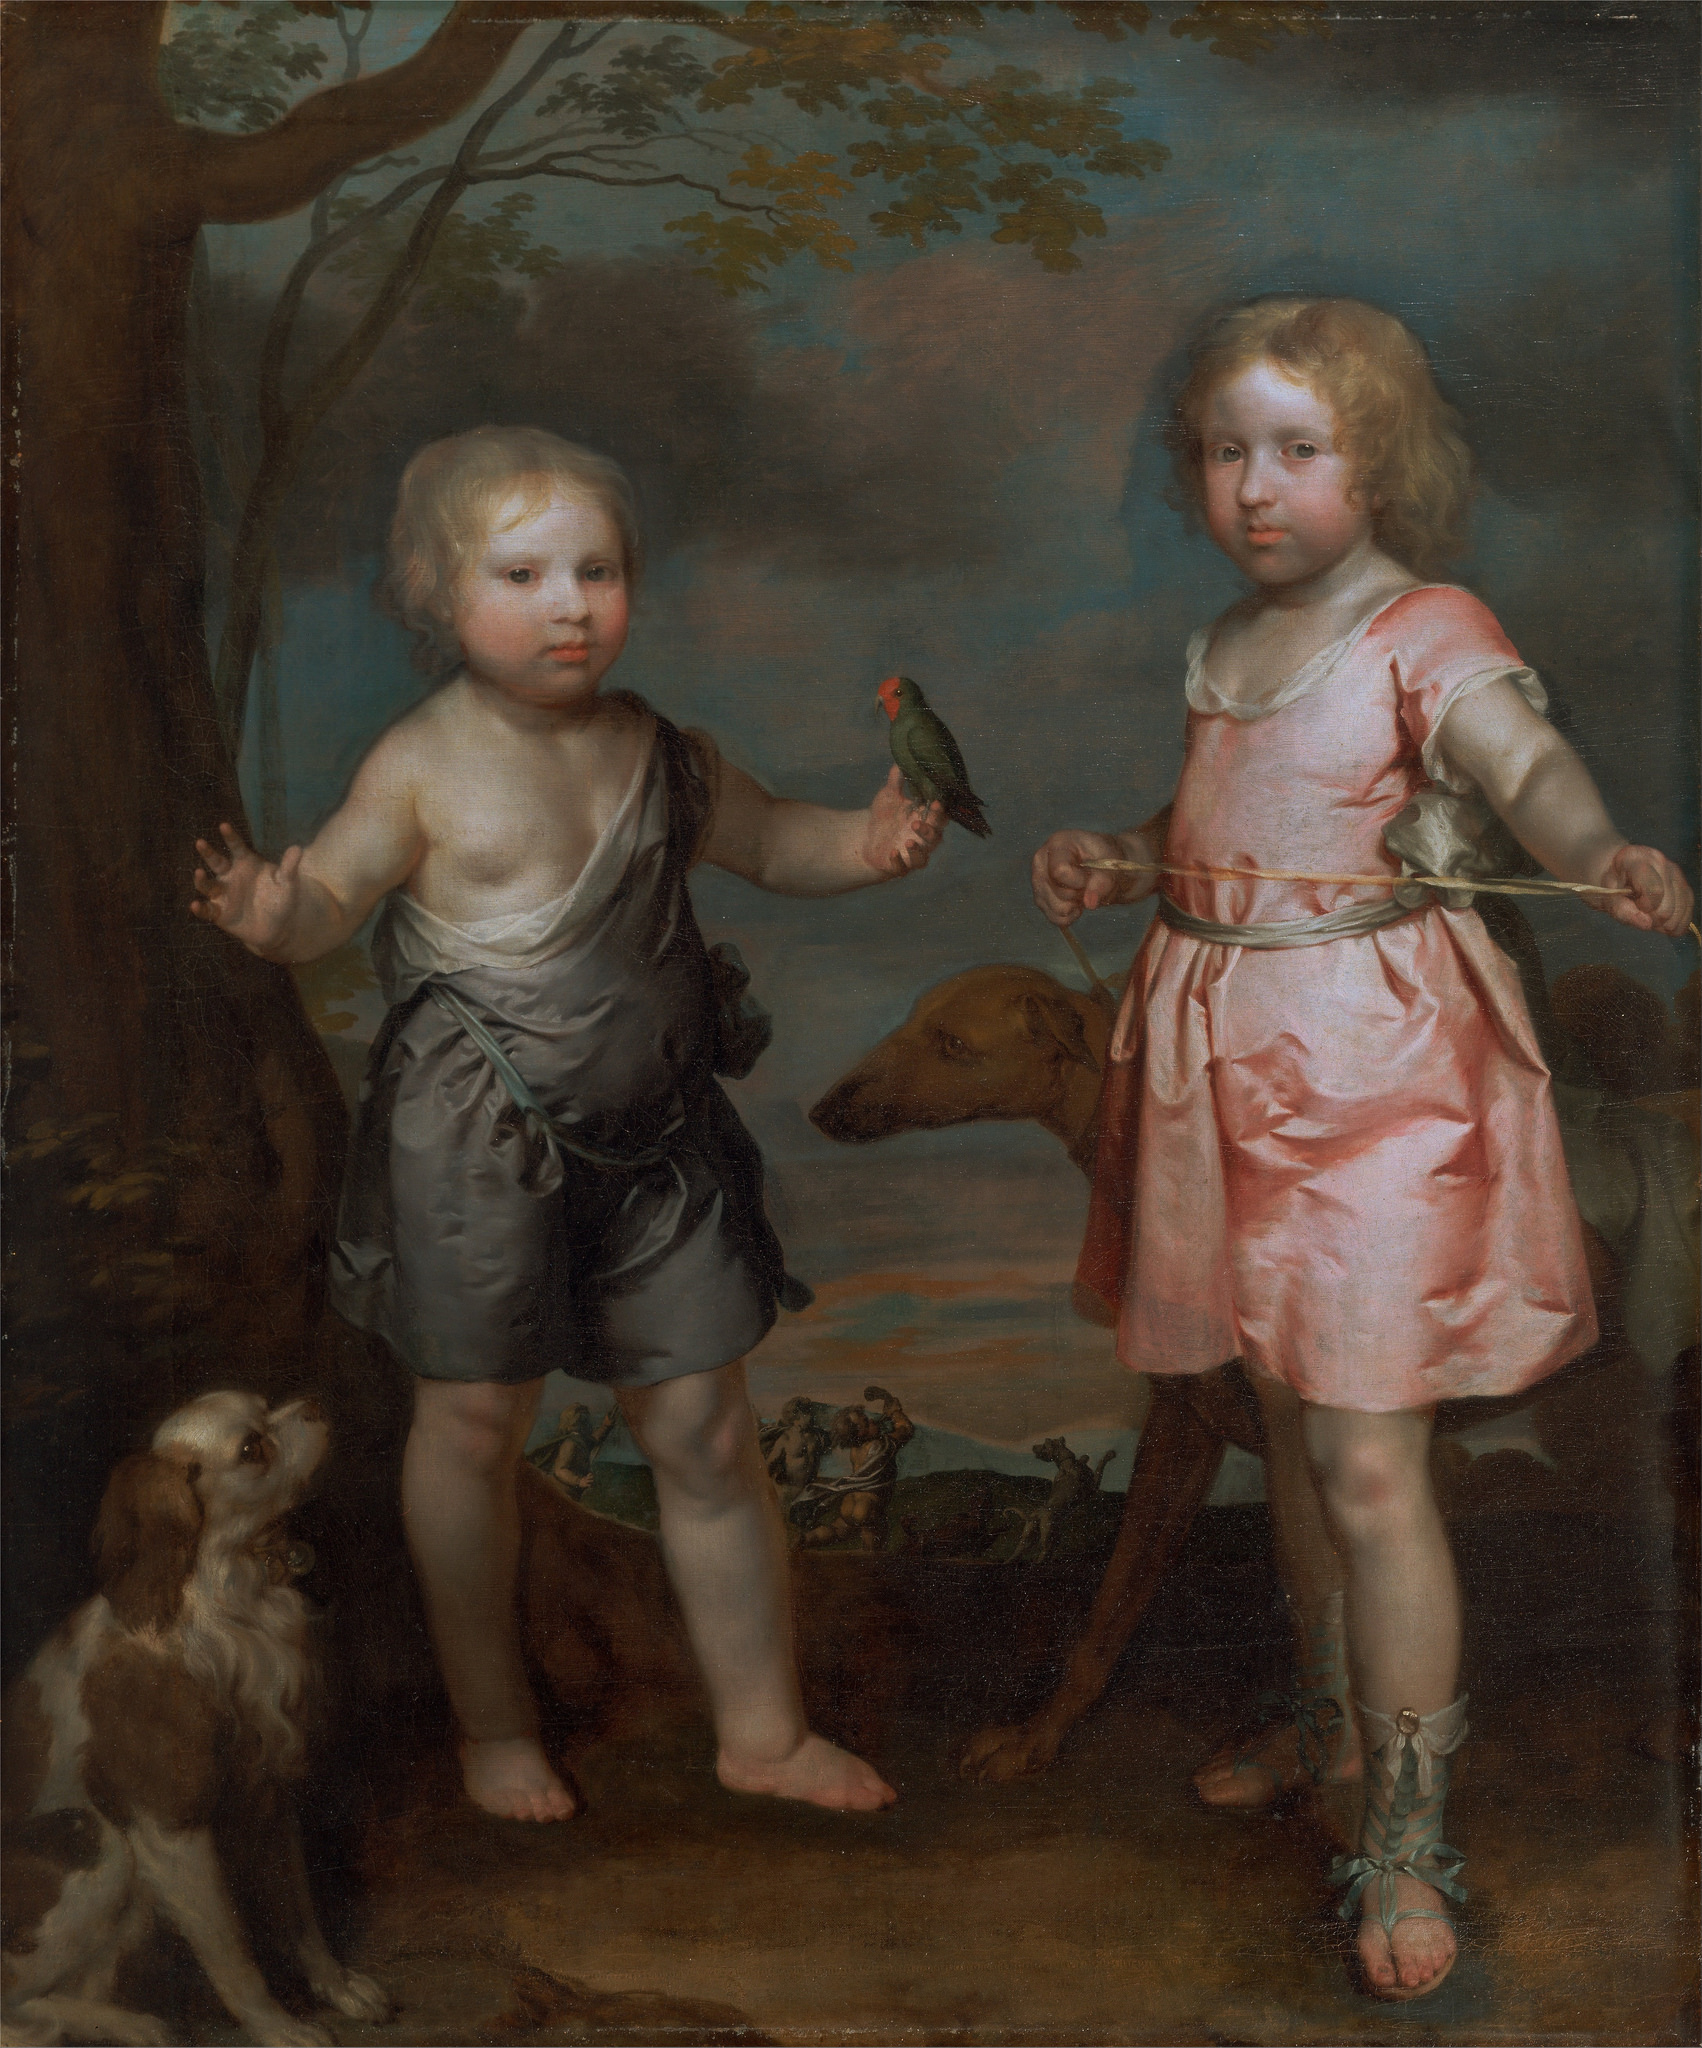 1670 ca Gilbert_Soest_-_Lord_John_Hay_and_Charles,_Master_of_Yester_(later_3rd_Marquis_of_Tweeddale)_Yale Center for British Art -Google_Art_Project